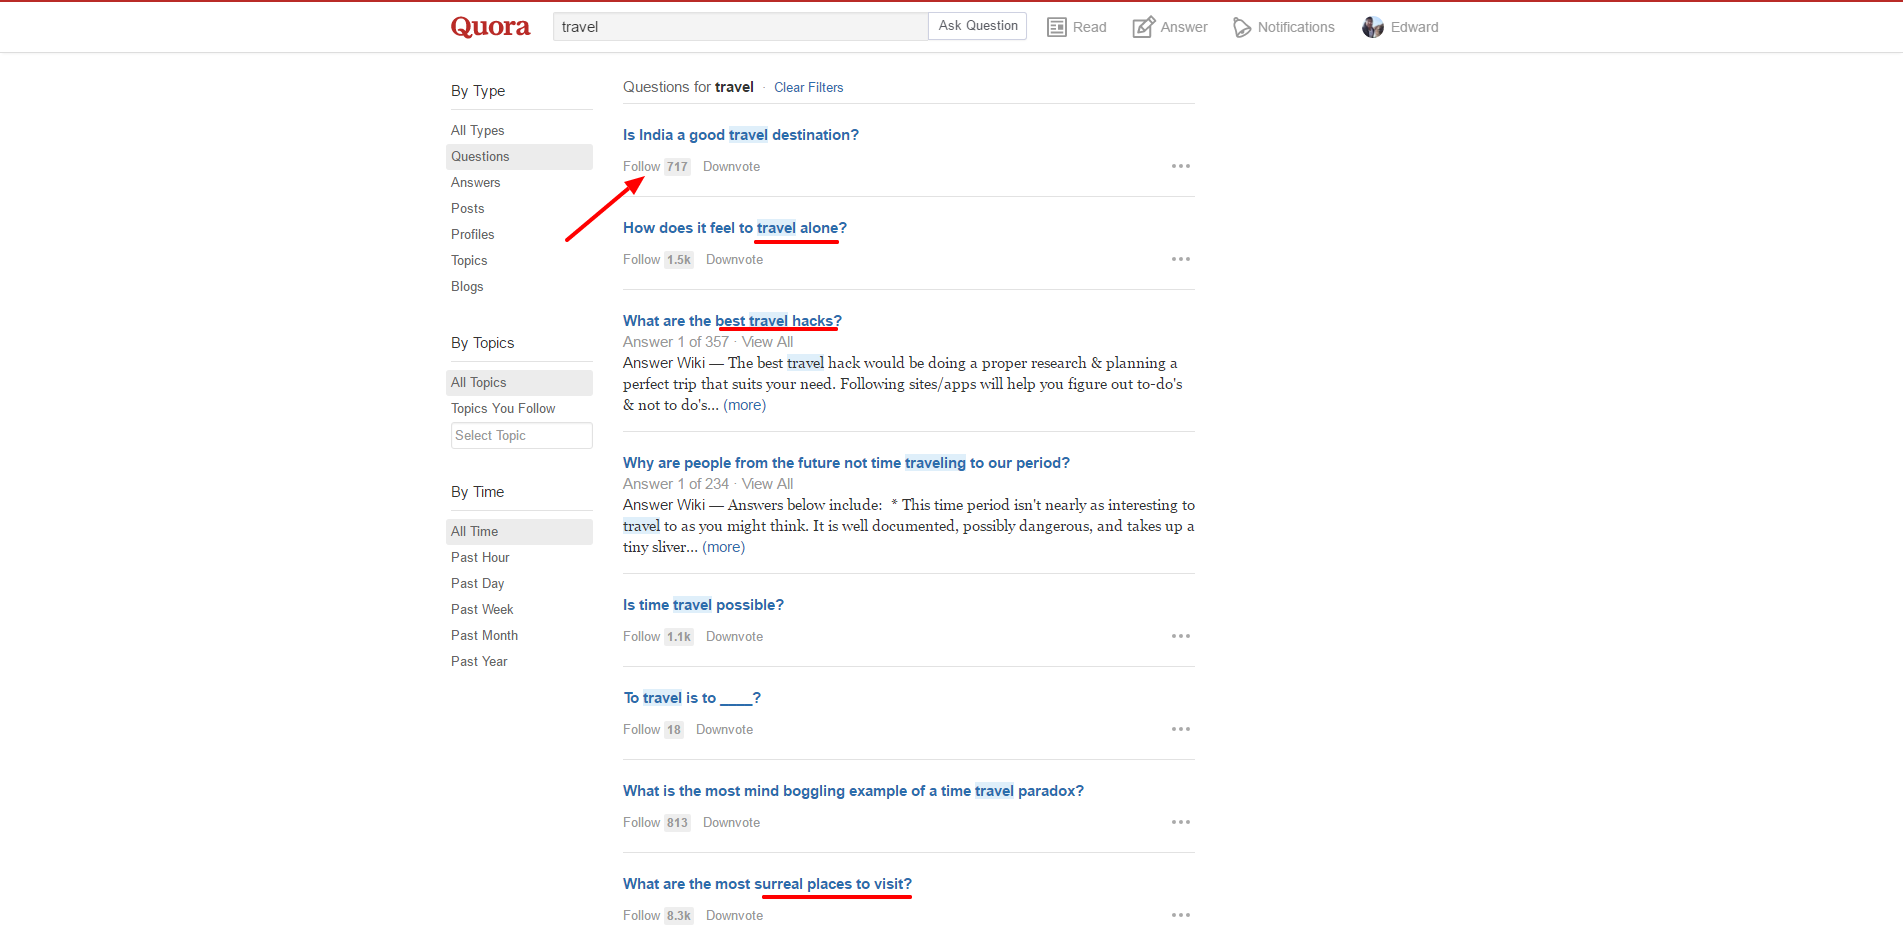 Finding blog content marketing ideas 8 - Quora questions